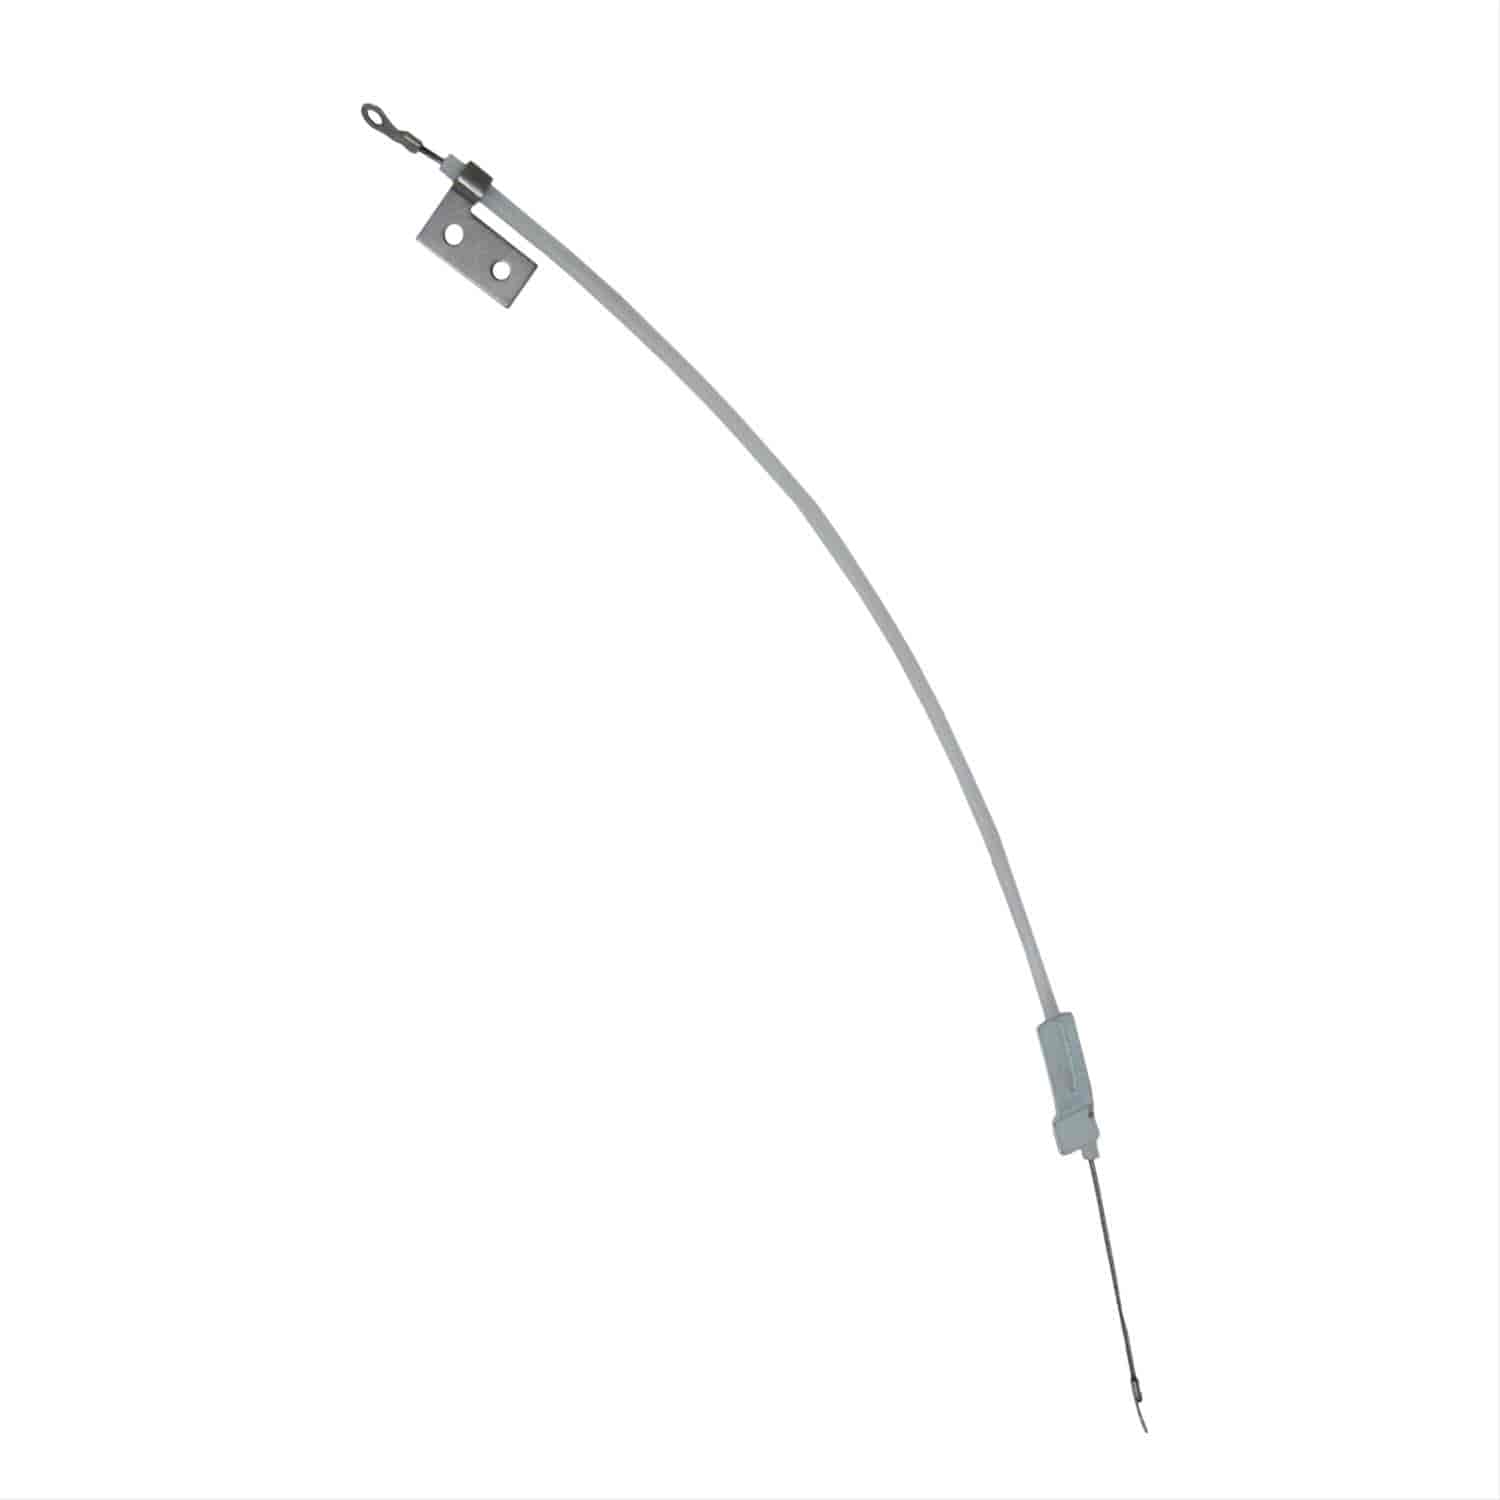 Megashifter Indicator Cable For Use With 130-80680 and